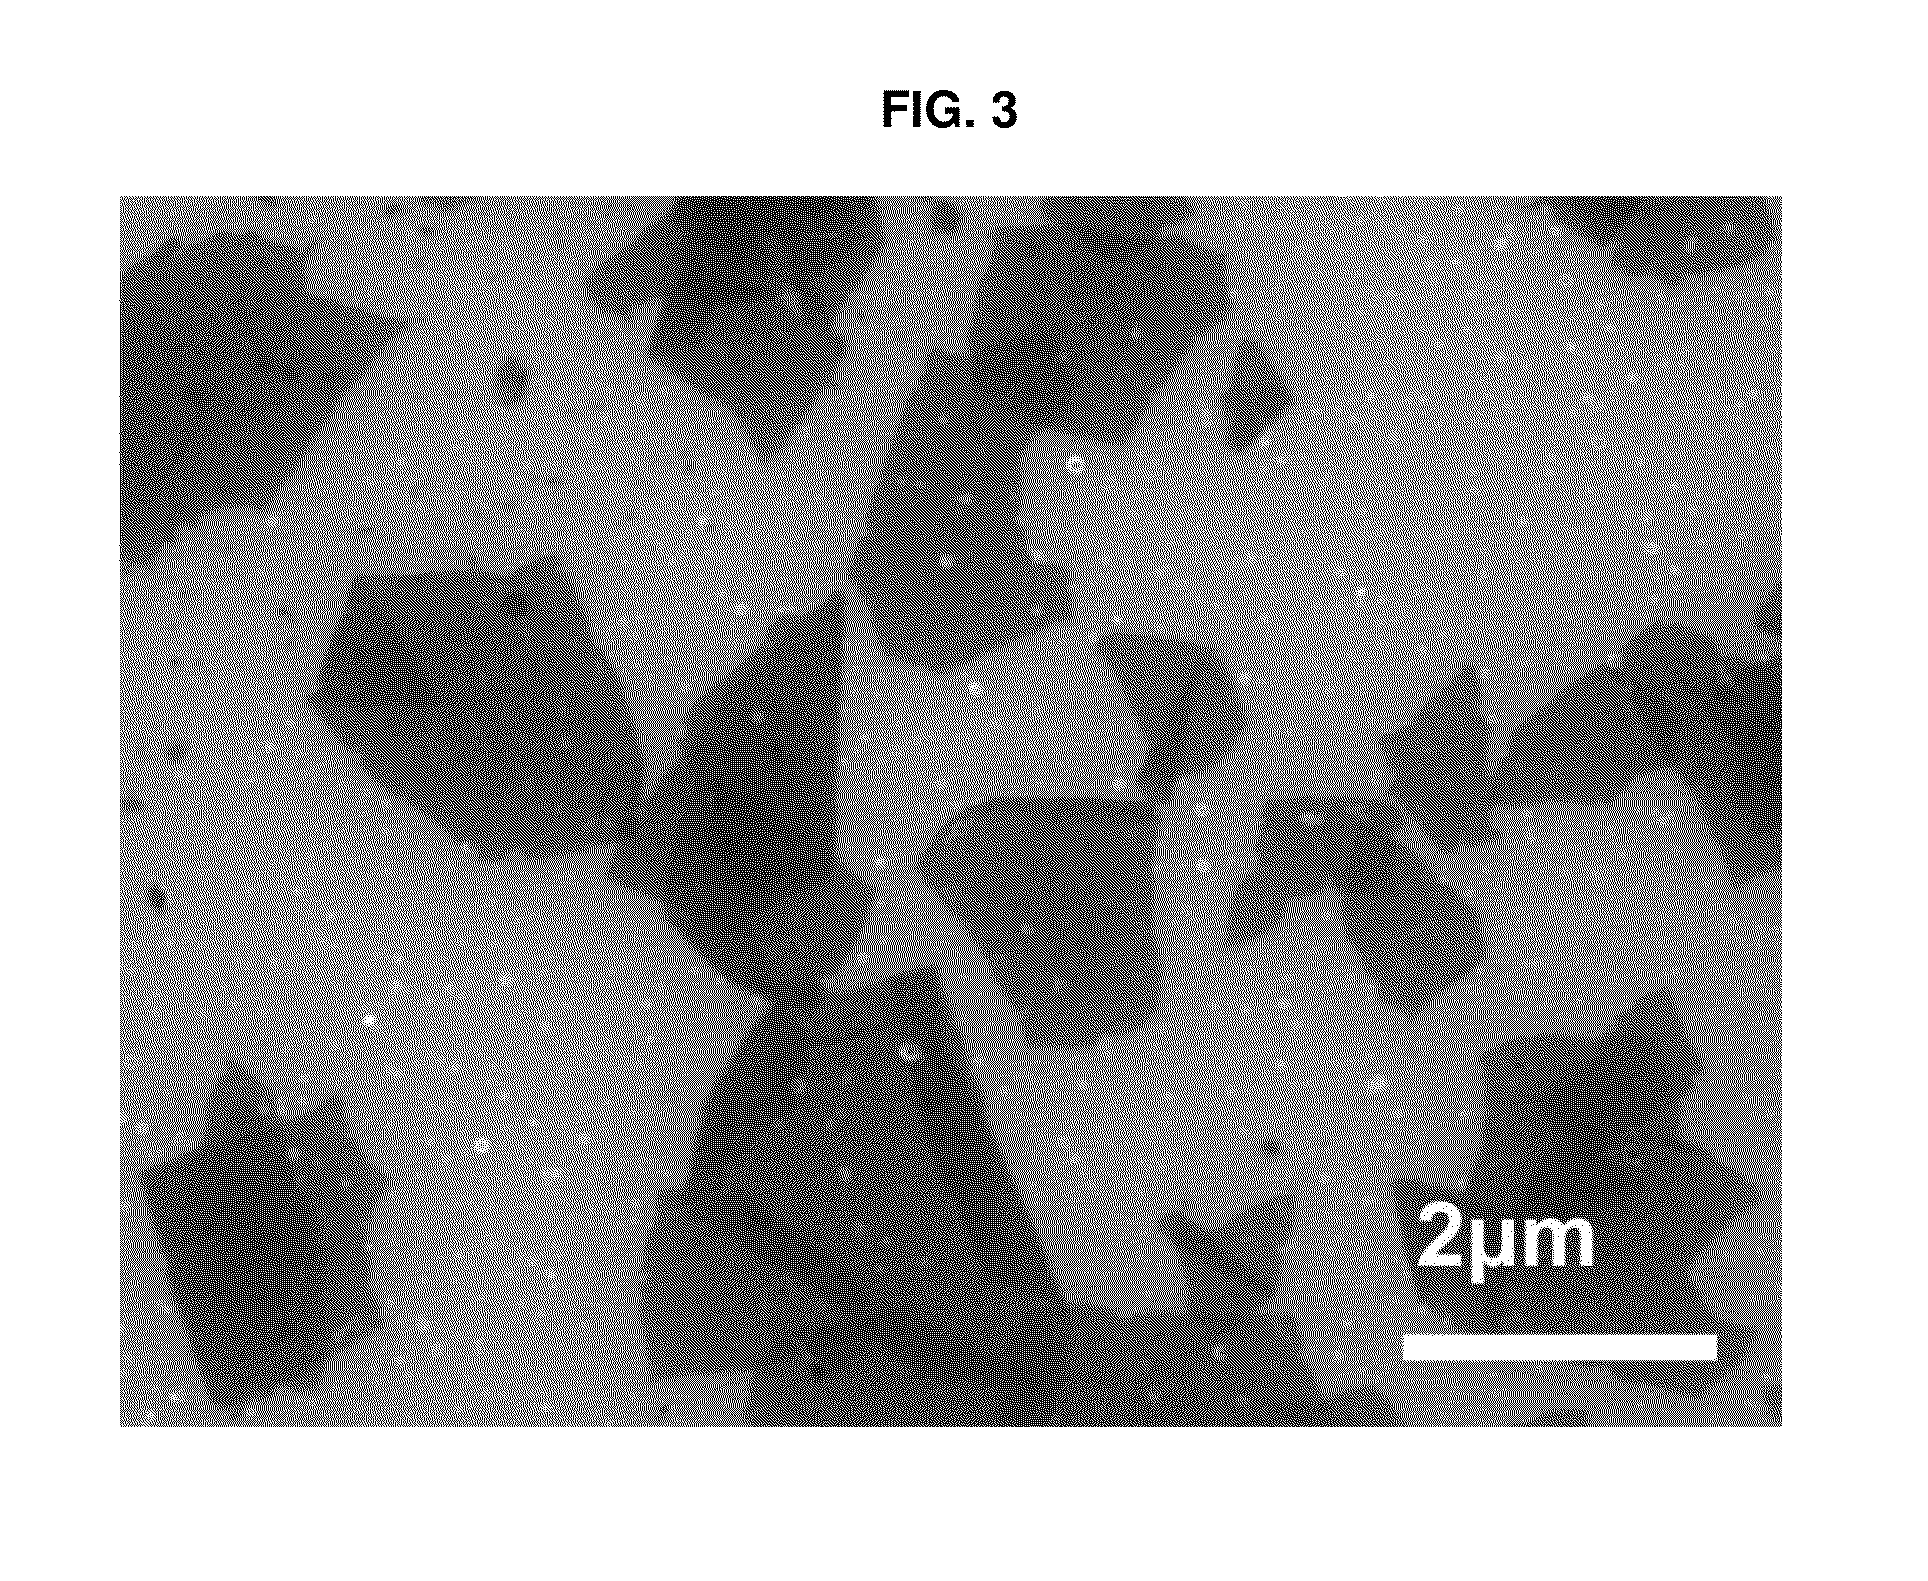 One-dimensional conductive nanomaterial-based conductive film having the conductivity thereof enhanced by a two-dimensional nanomaterial